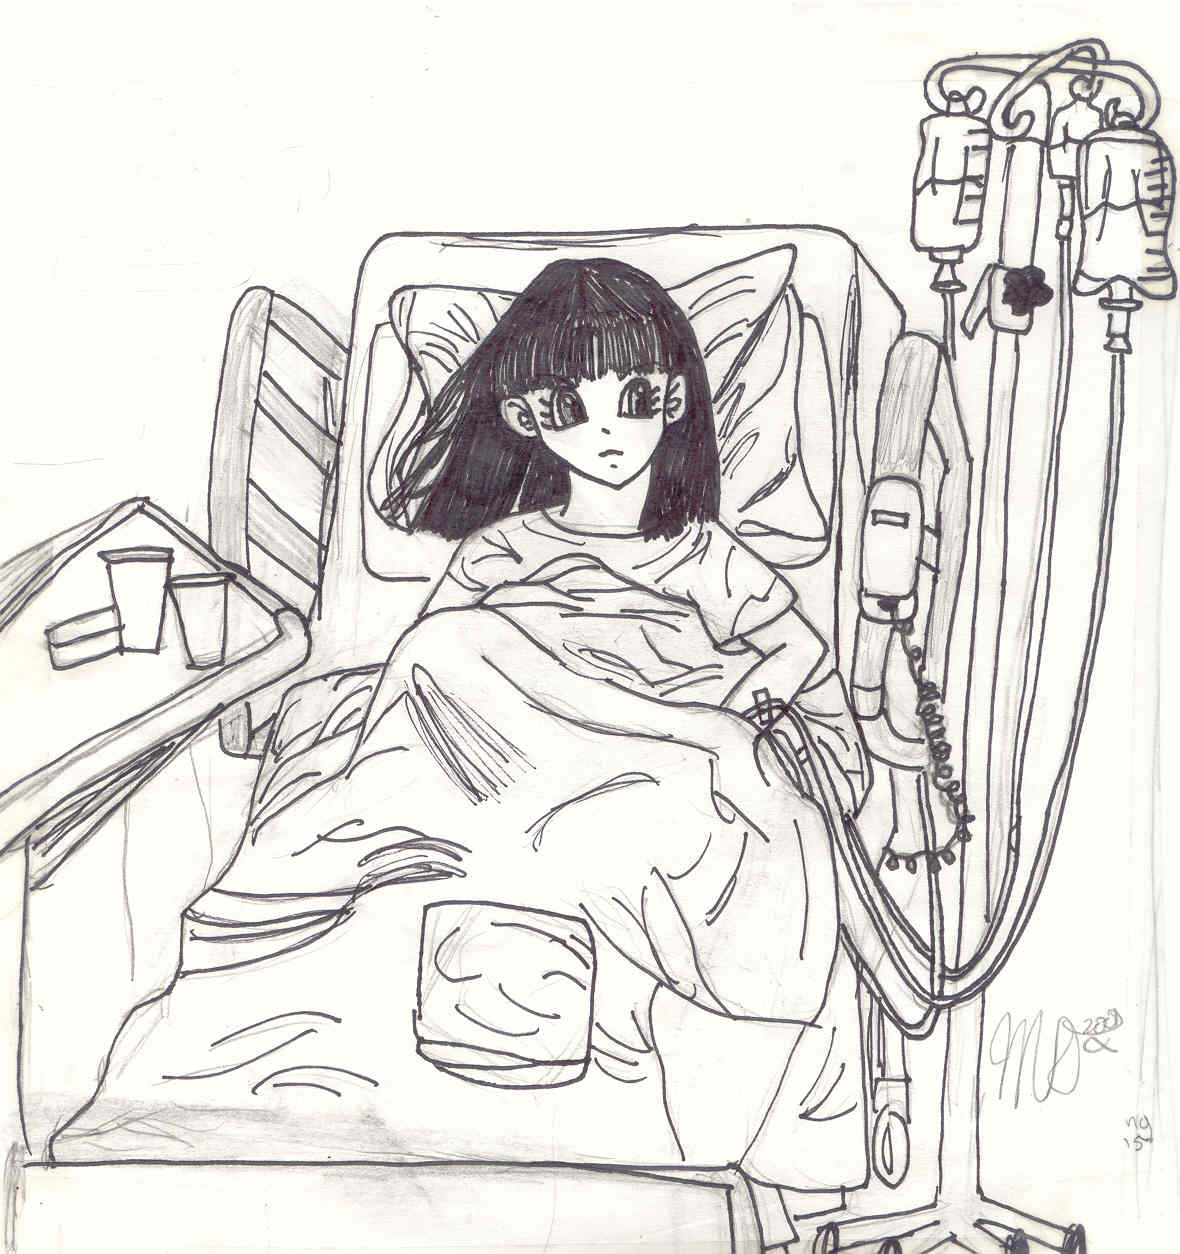 Pan In the Hospital by TellBell